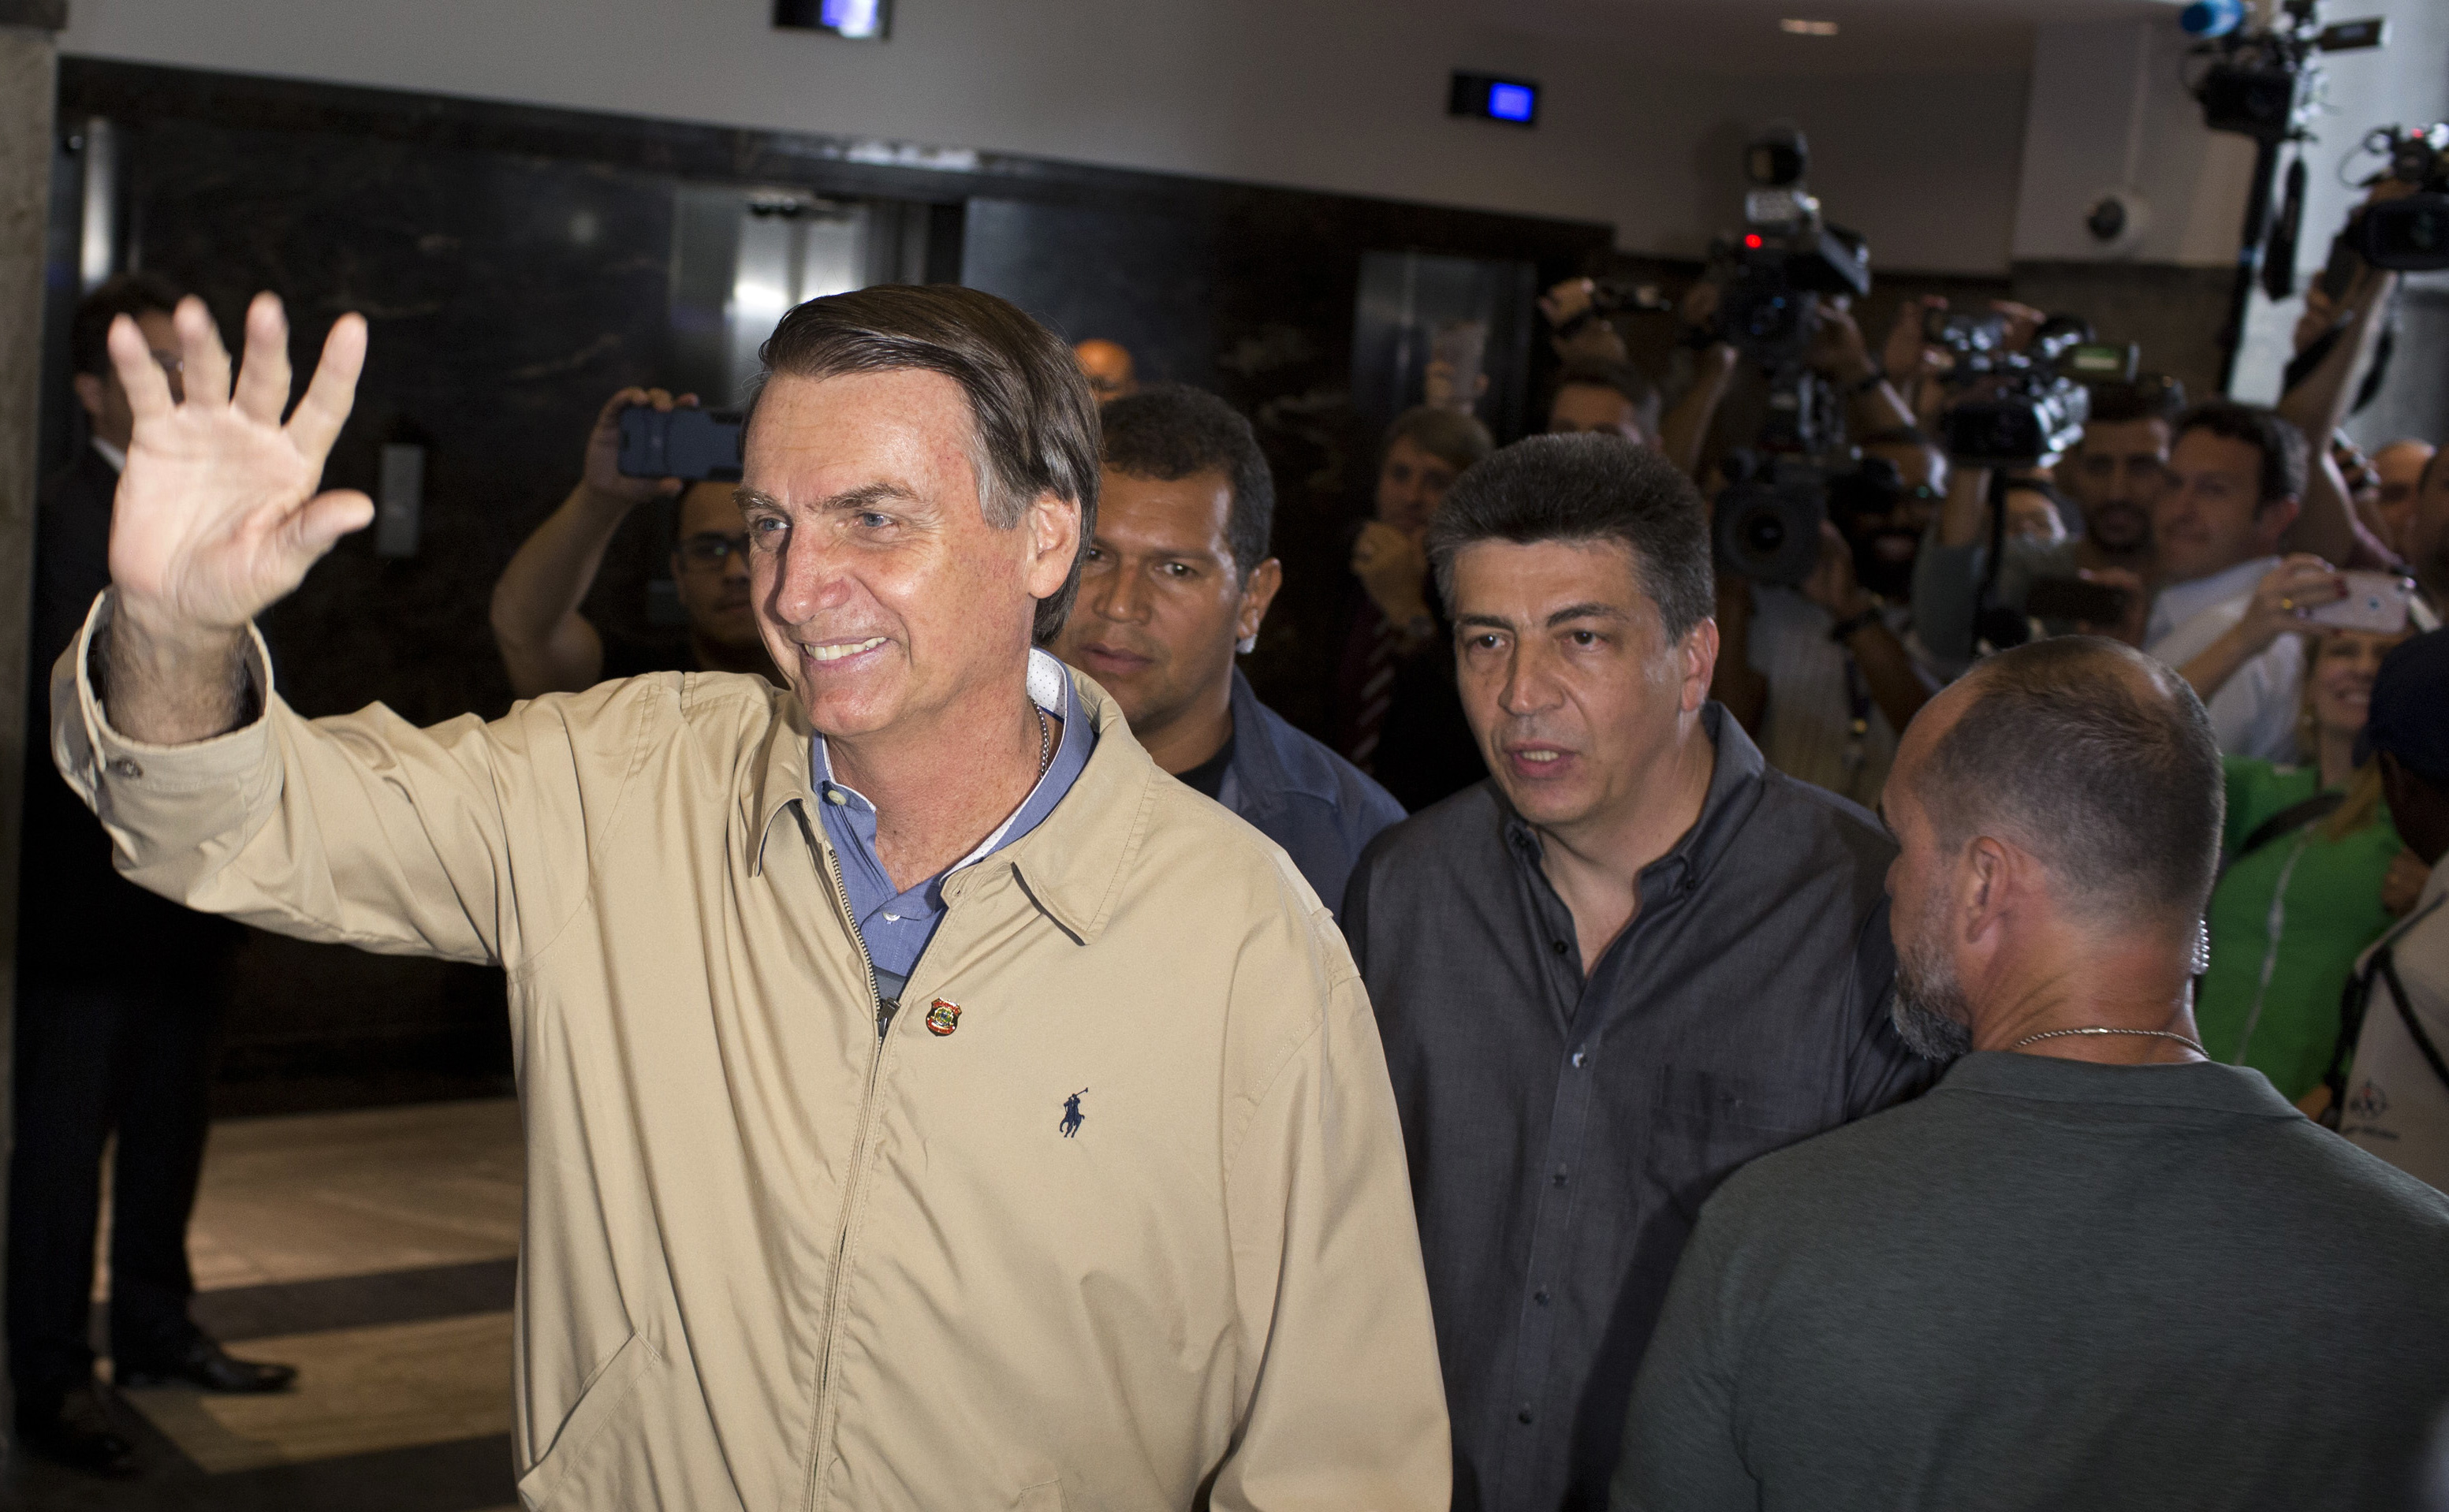 Presidential candidate Jair Bolsonaro, with the Social Liberal Party, waves to the press after visiting Federal Police headquarters in Rio de Janeiro, Brazil, Wednesday, Oct. 17, 2018. Bolsonaro won the first round of the presidential election Oct. 7 with 46 percent of the vote, but since he failed to top 50 percent, he is in a second-round ballot on Oct. 28. (AP Photo/Silvia Izquierdo)